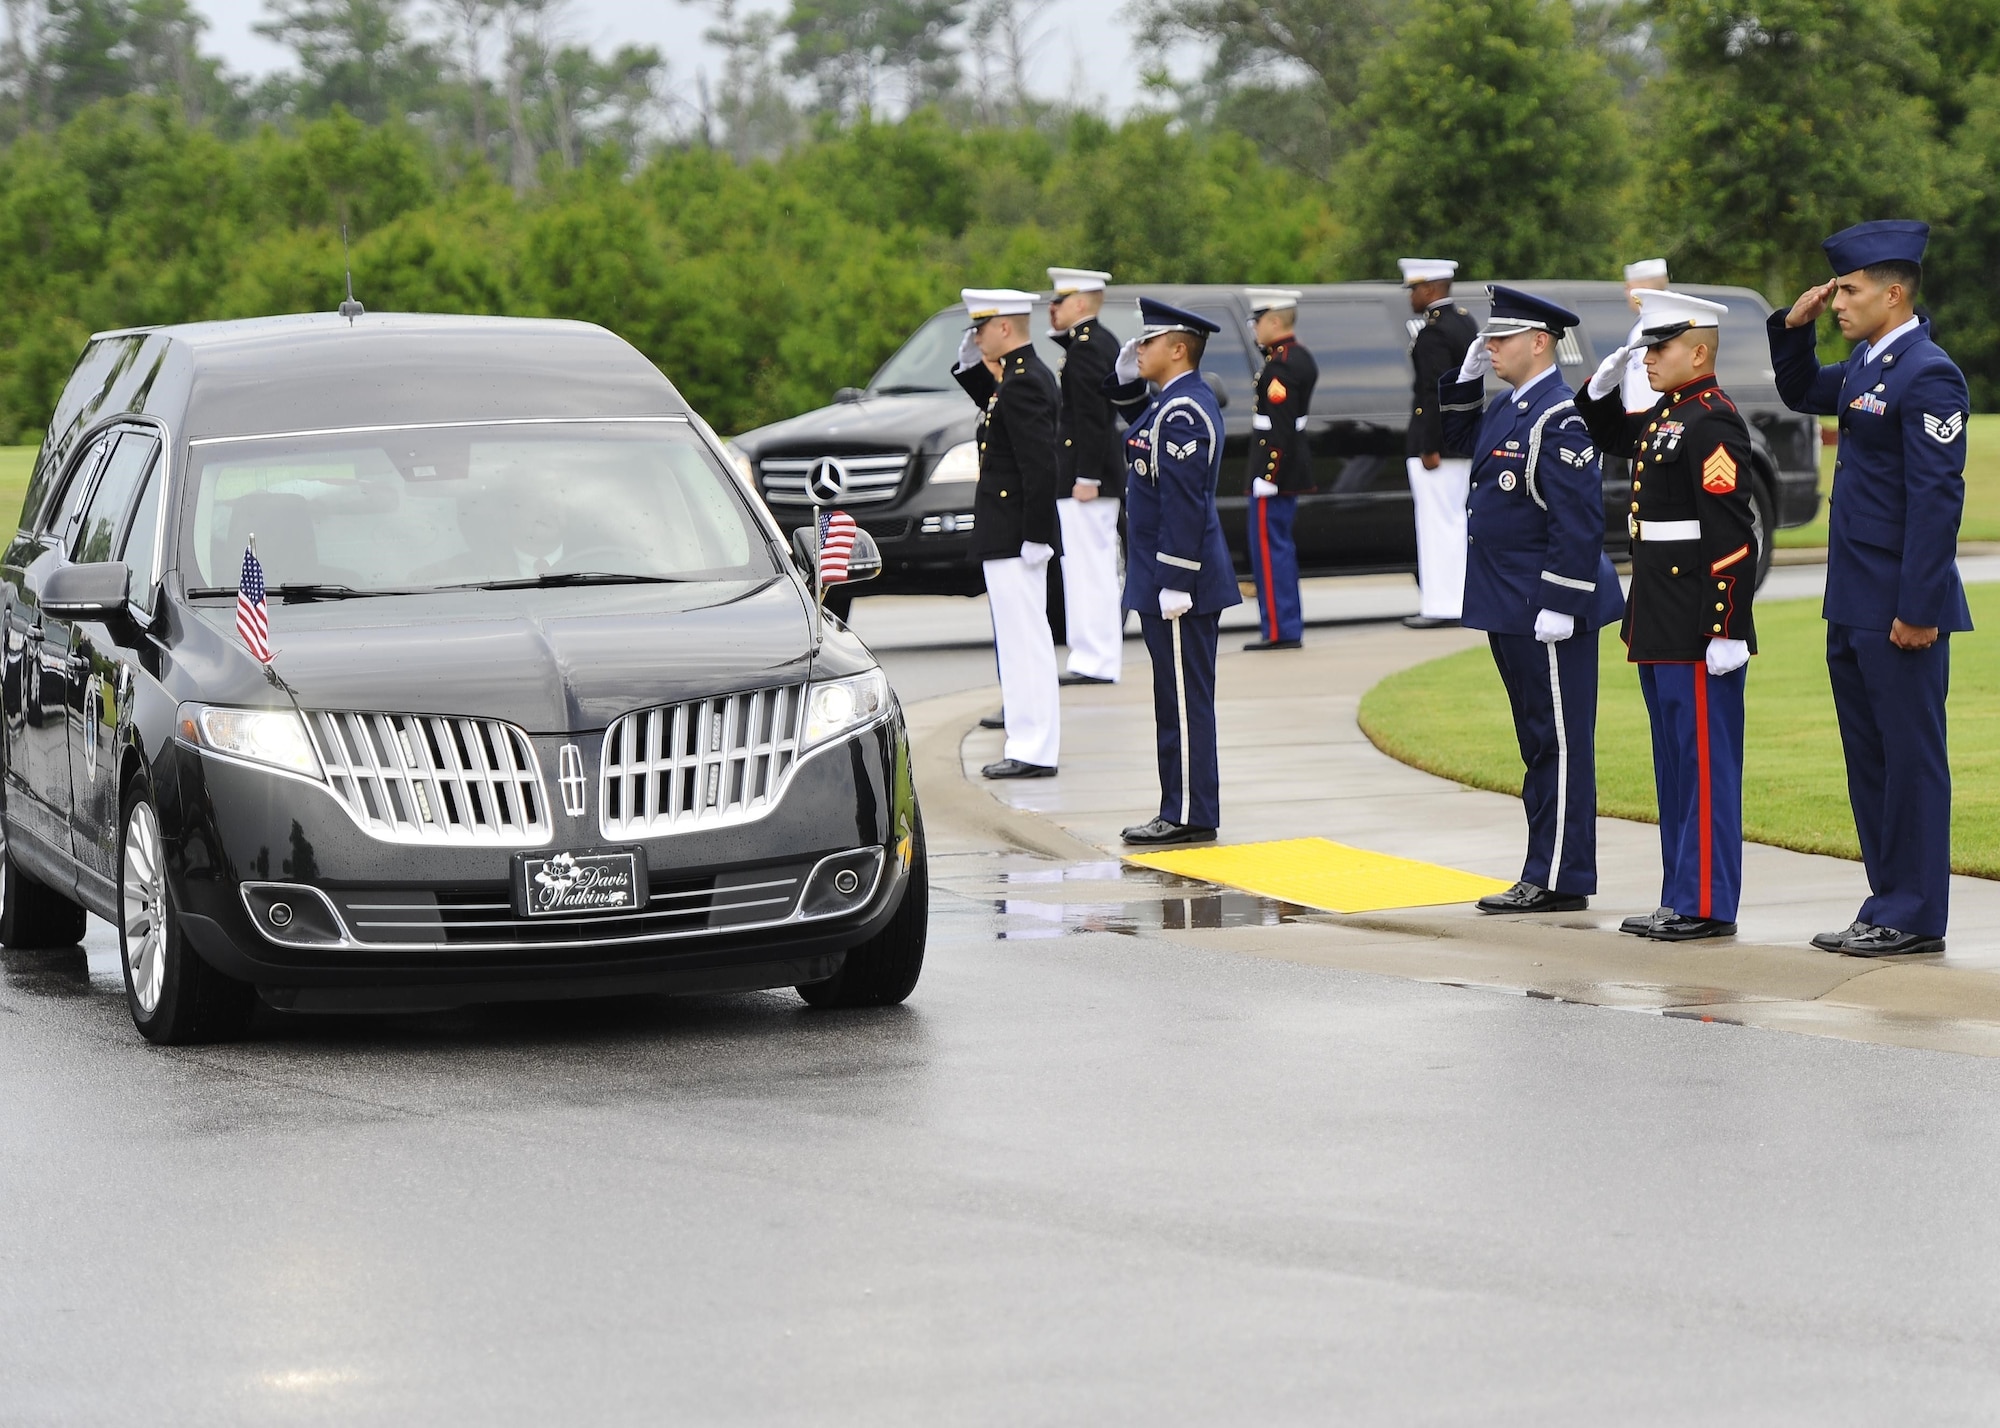 Service members salute retired U.S. Air Force Col. George “Bud” Day’s hearse as it arrives to Barrancas National Cemetery on Naval Air Station Pensacola, Fla., Aug. 1, 2013. Day, a Medal of Honor recipient and combat pilot with service in World War II, Korea and Vietnam, passed away July 27 at the age of 88. (U.S. Air Force Photo/Airman 1st Class Jeffrey Parkinson) 